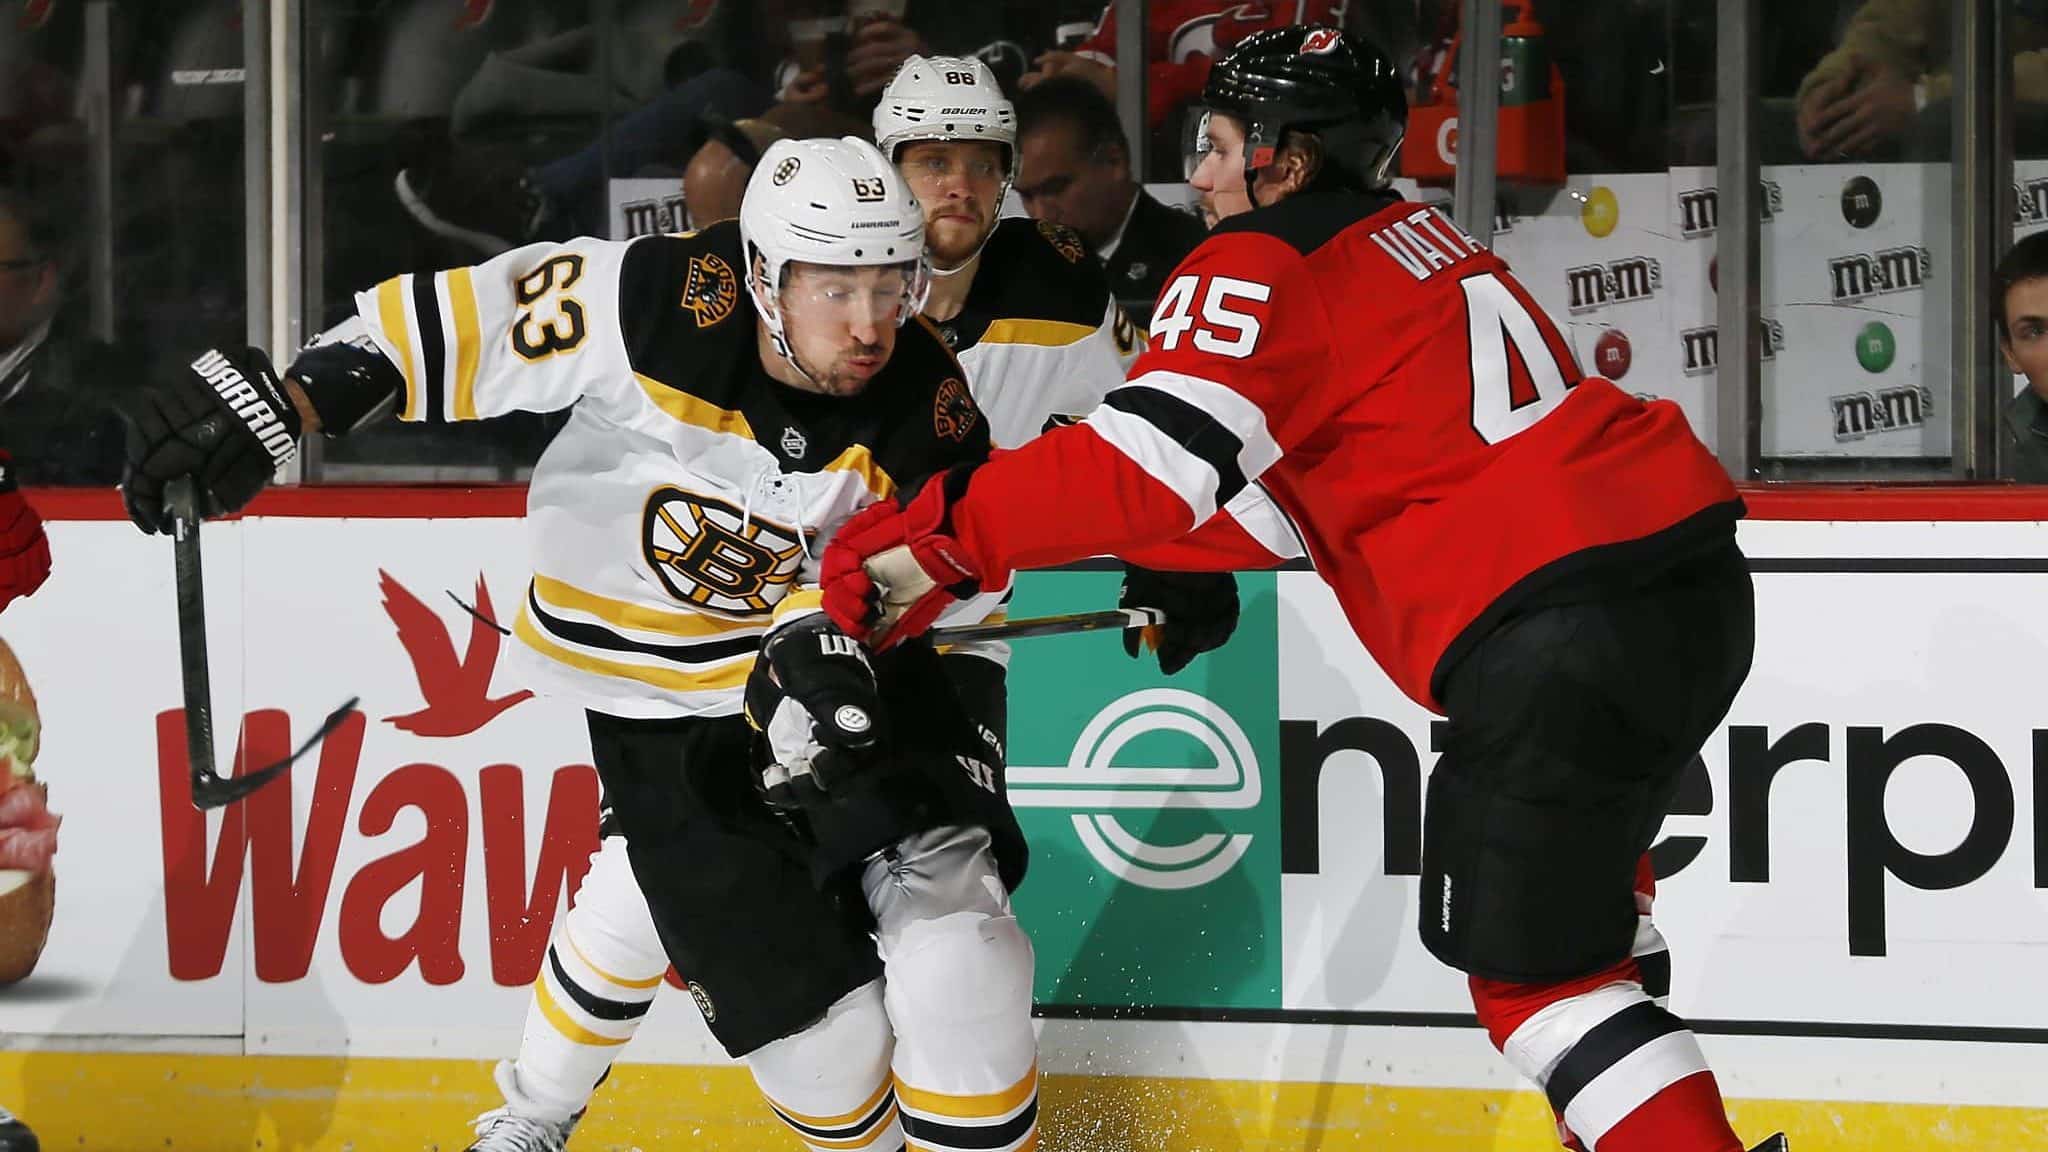 NEWARK, NJ - DECEMBER 31: Brad Marchand #63 of the Boston Bruins tries to skate past Sami Vatanen #45 of the New Jersey Devils during an NHL hockey game on December 31, 2019 at the Prudential Center in Newark, New Jersey. Devils won 3-2 in a shootout.